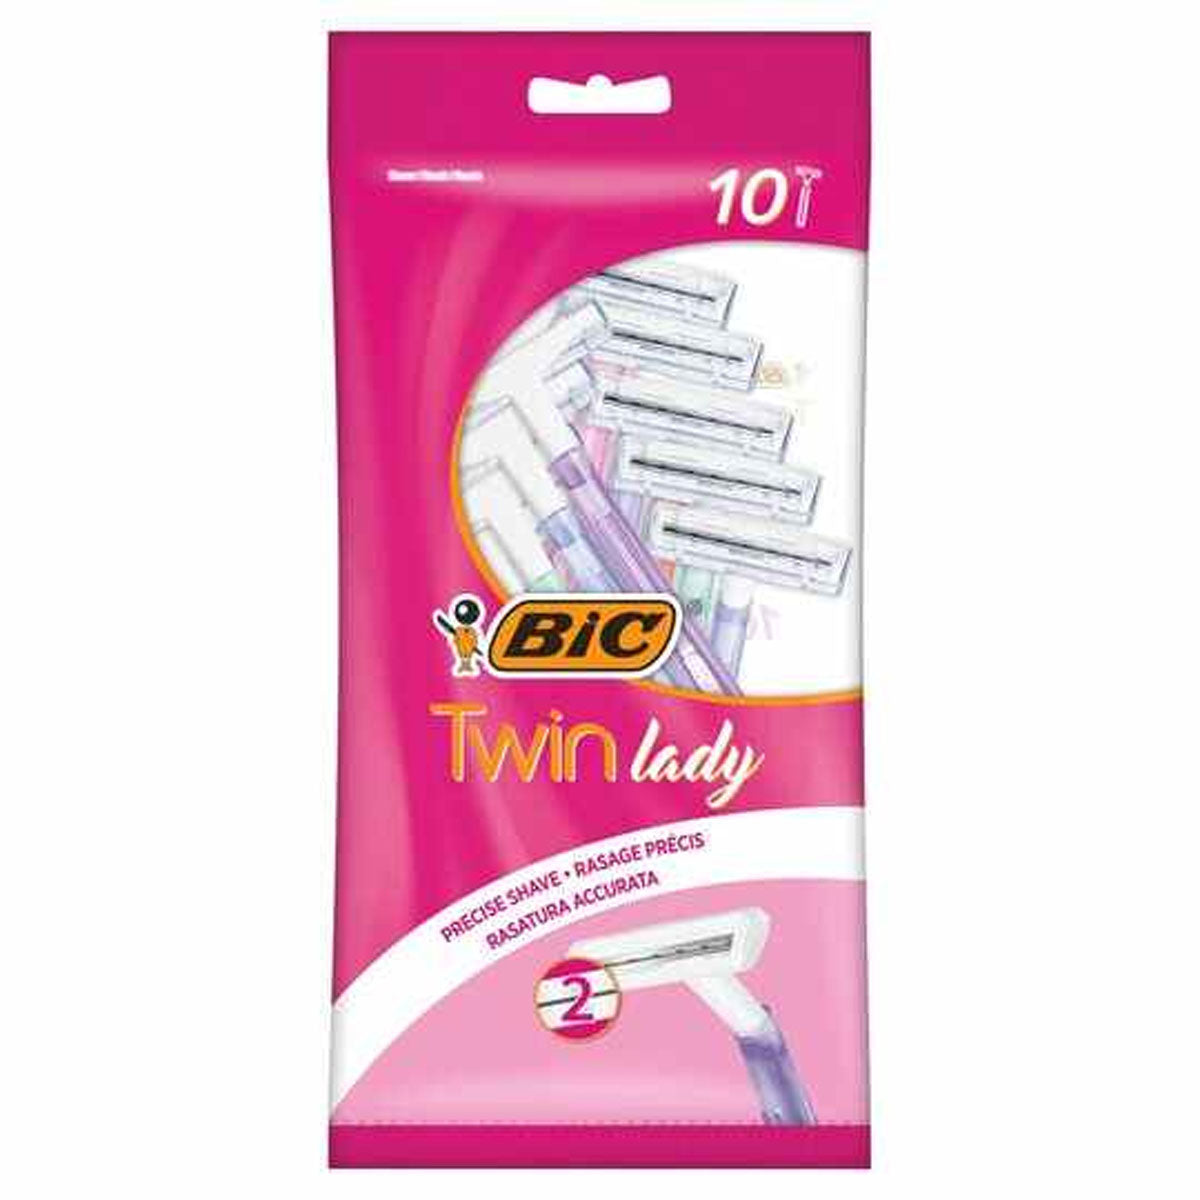 BIC - Twin Lady P5 - Box of 10 - Continental Food Store